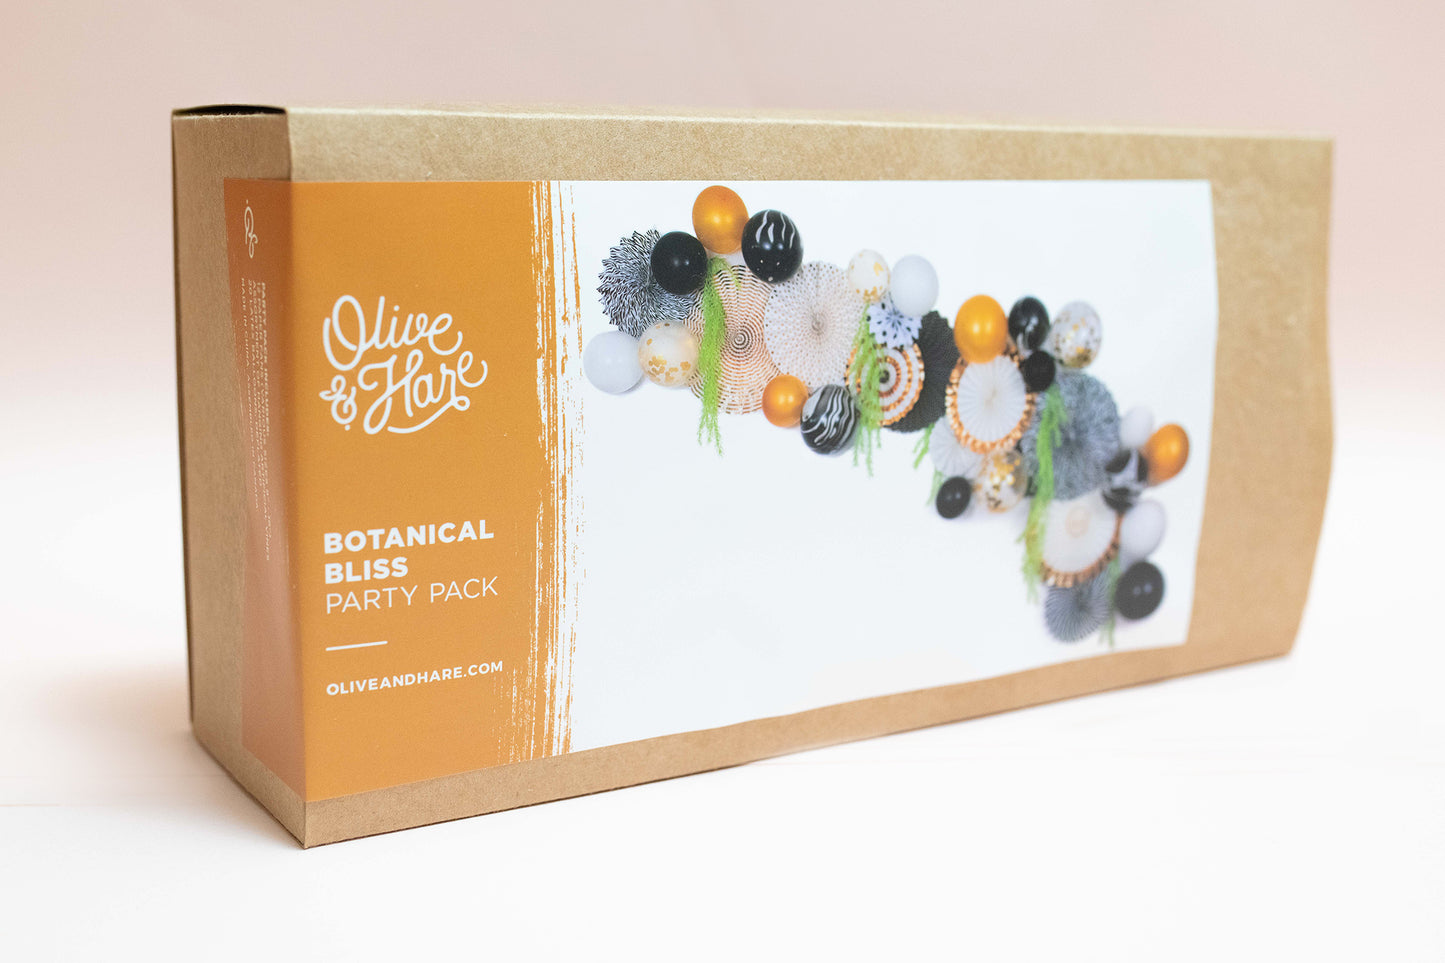 Botanical Bliss Party Pack